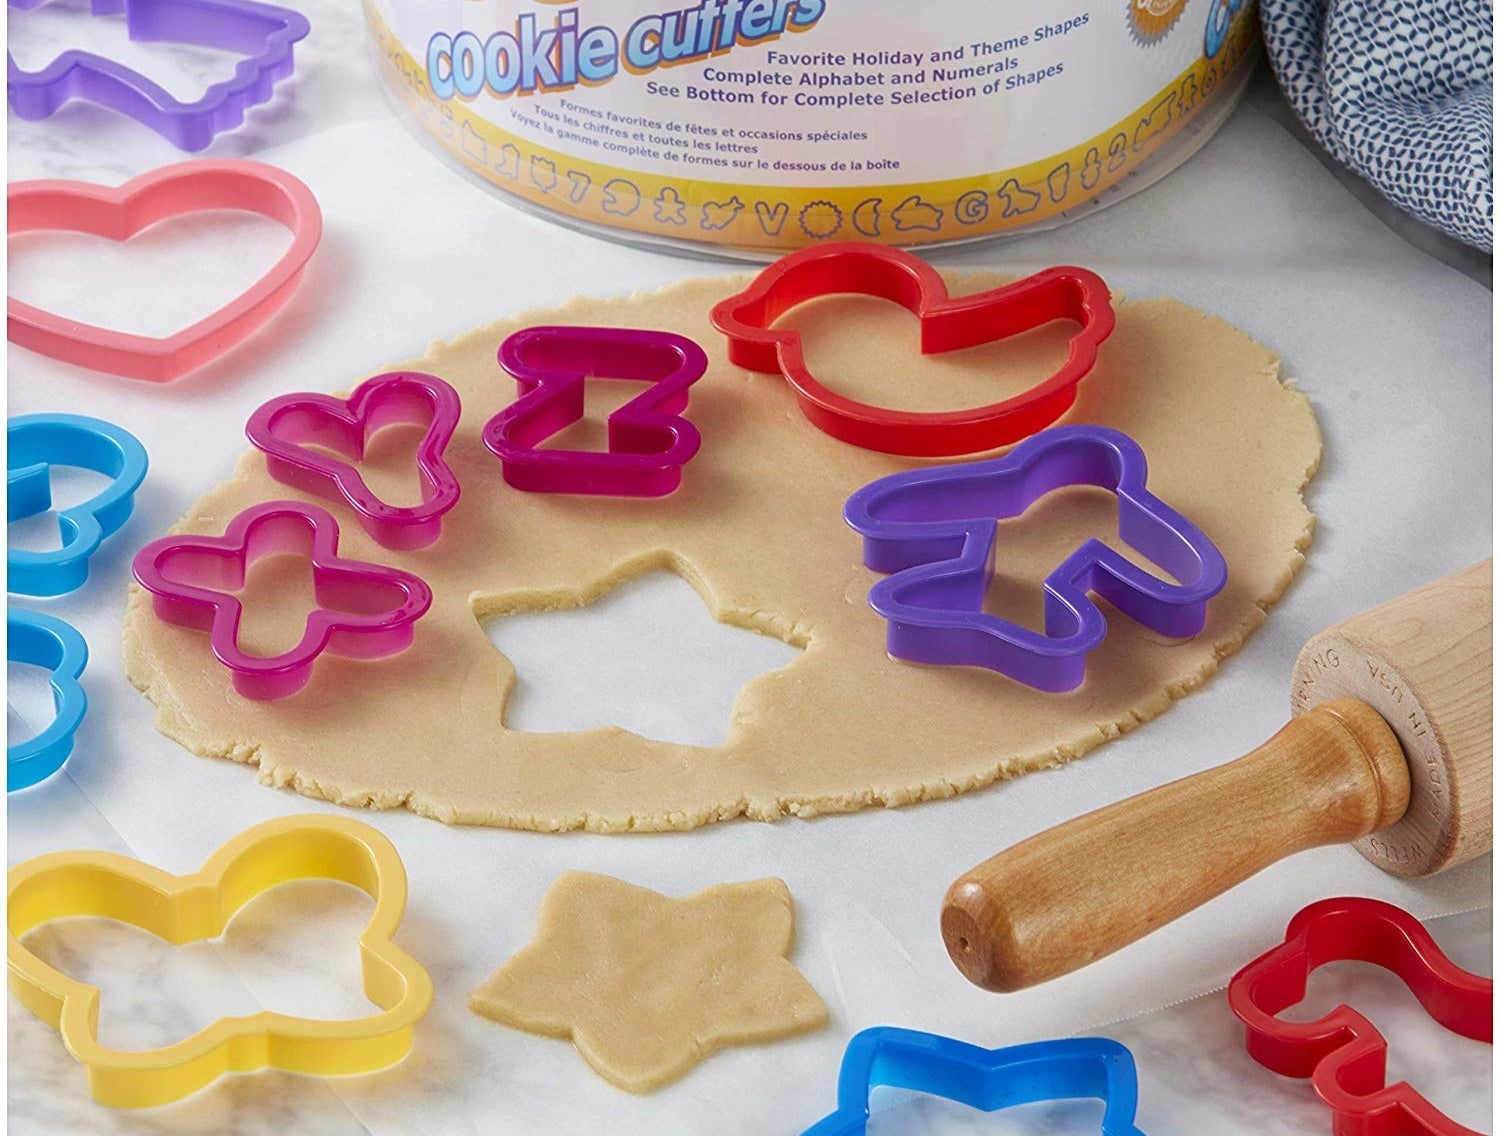 The cookie cutter set in various shapes and colors